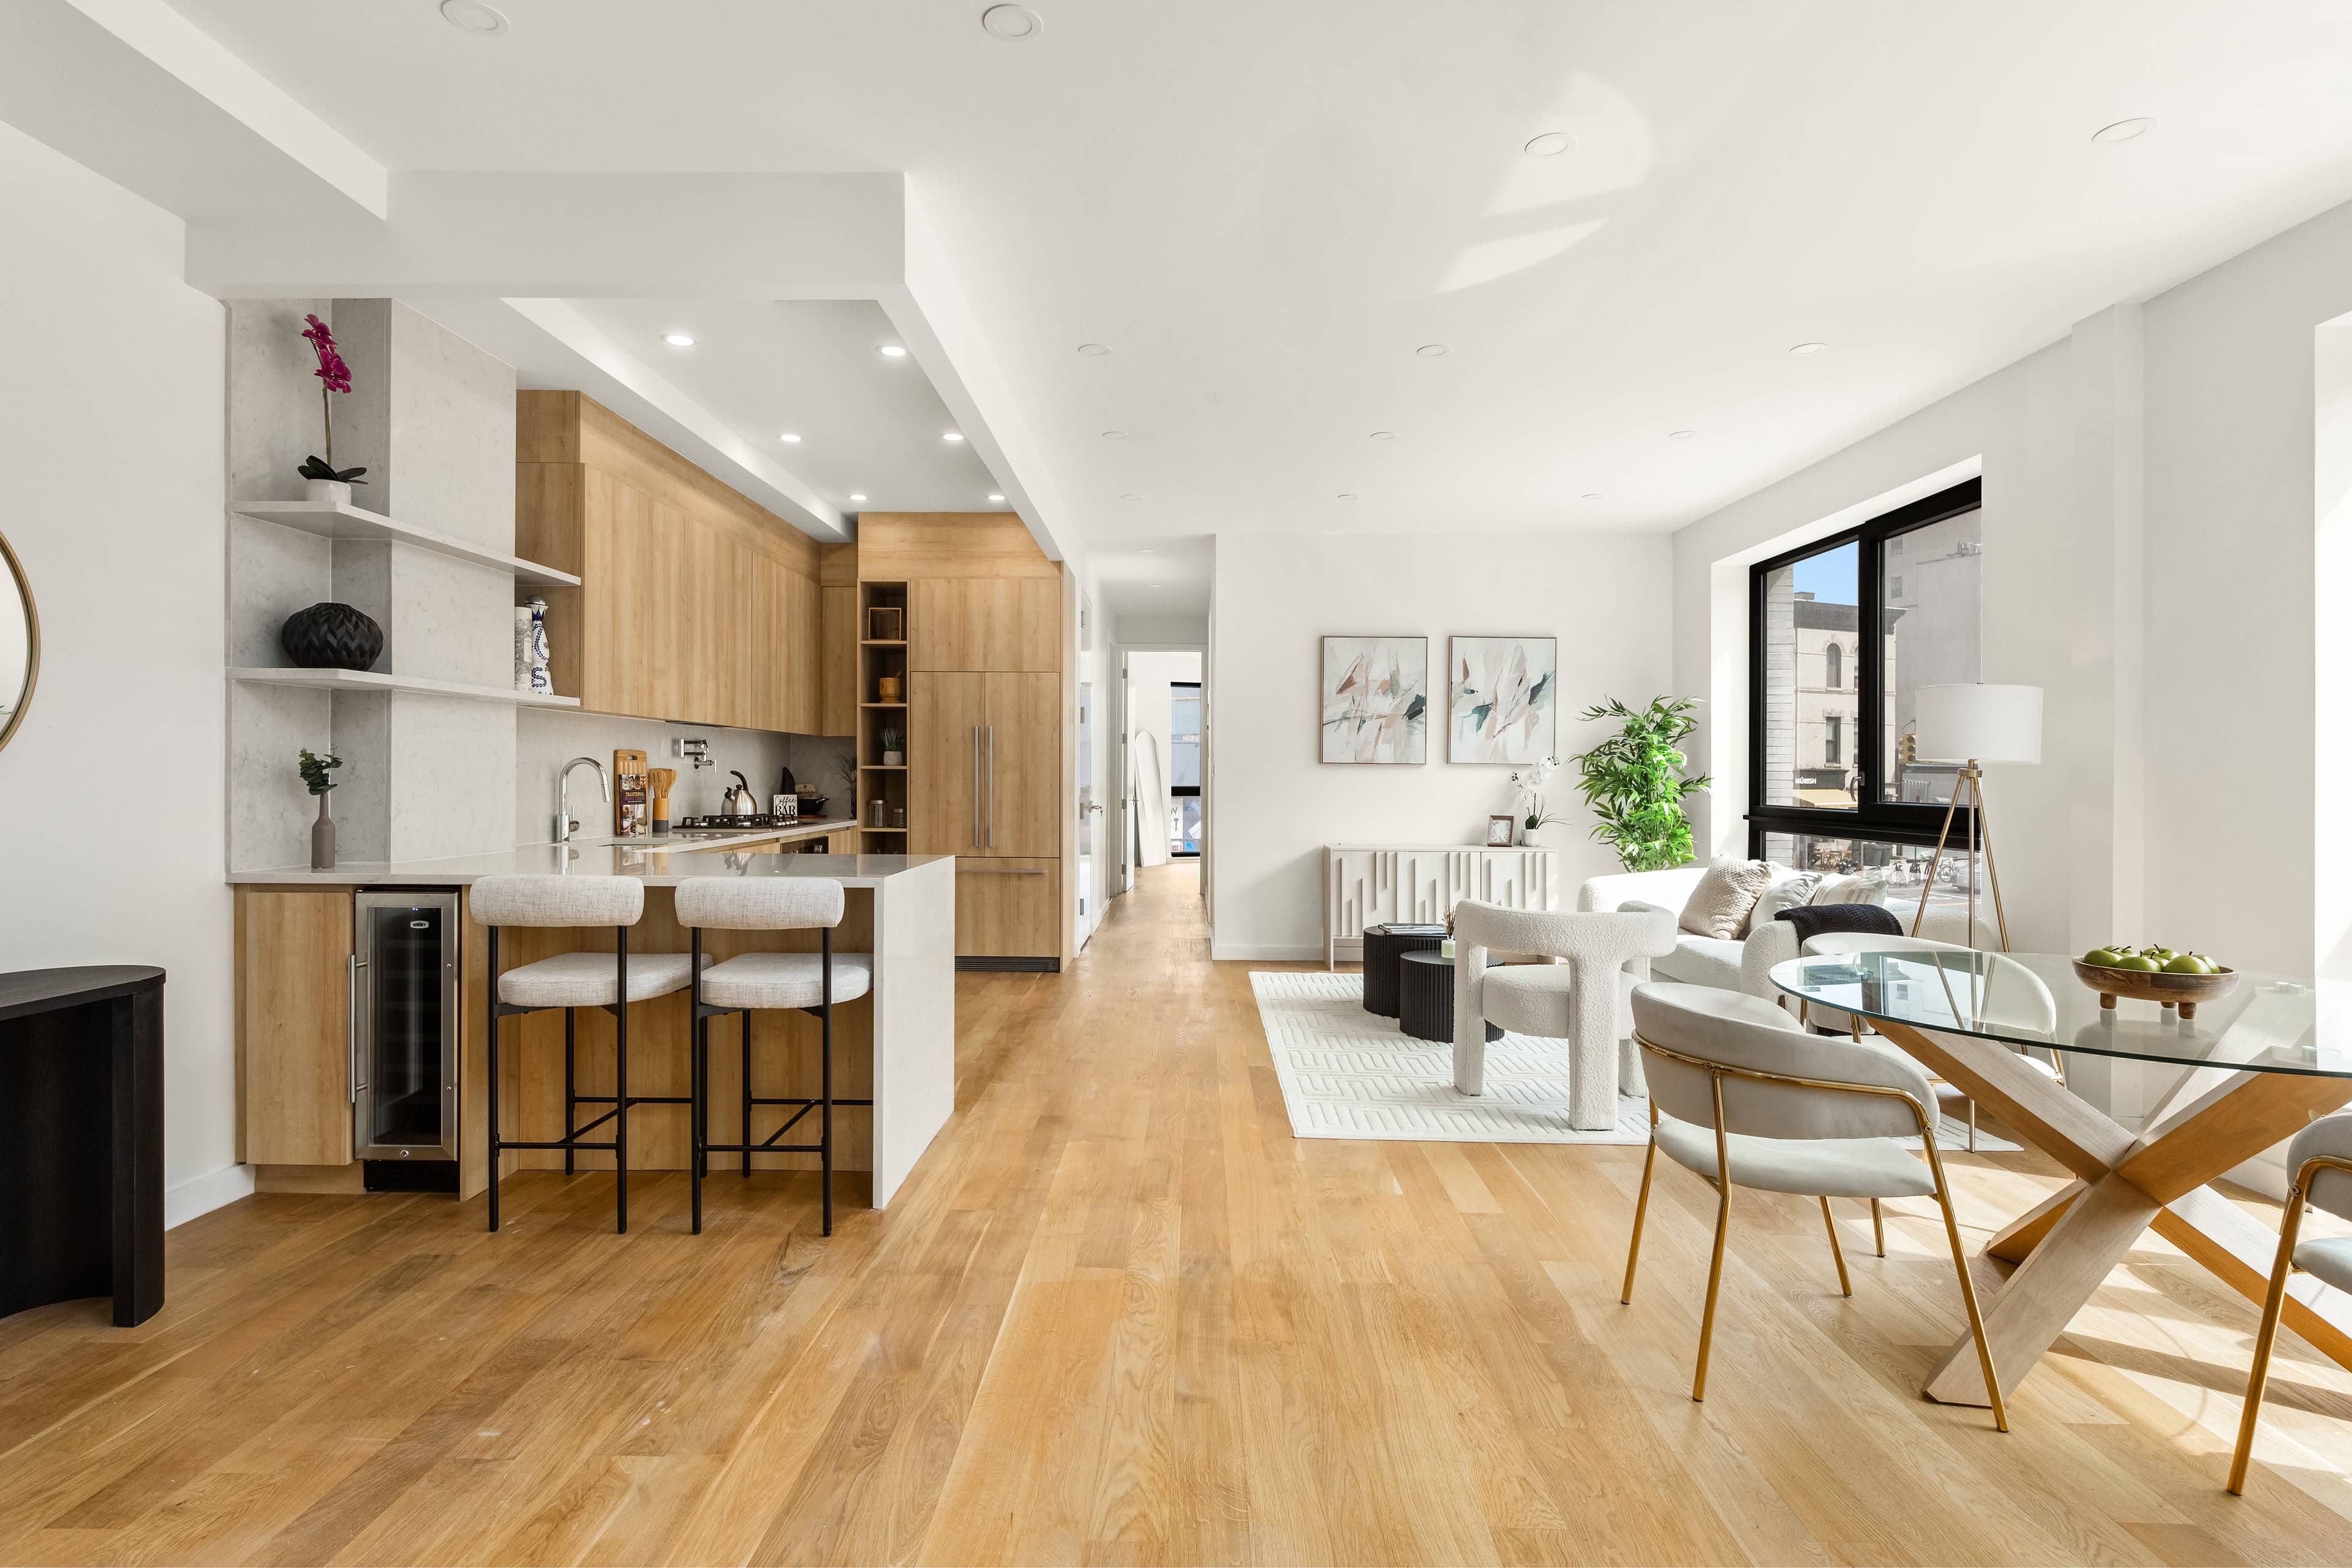 Luxurious 3 bed/2 bath New Dev condo in Prospect Heights